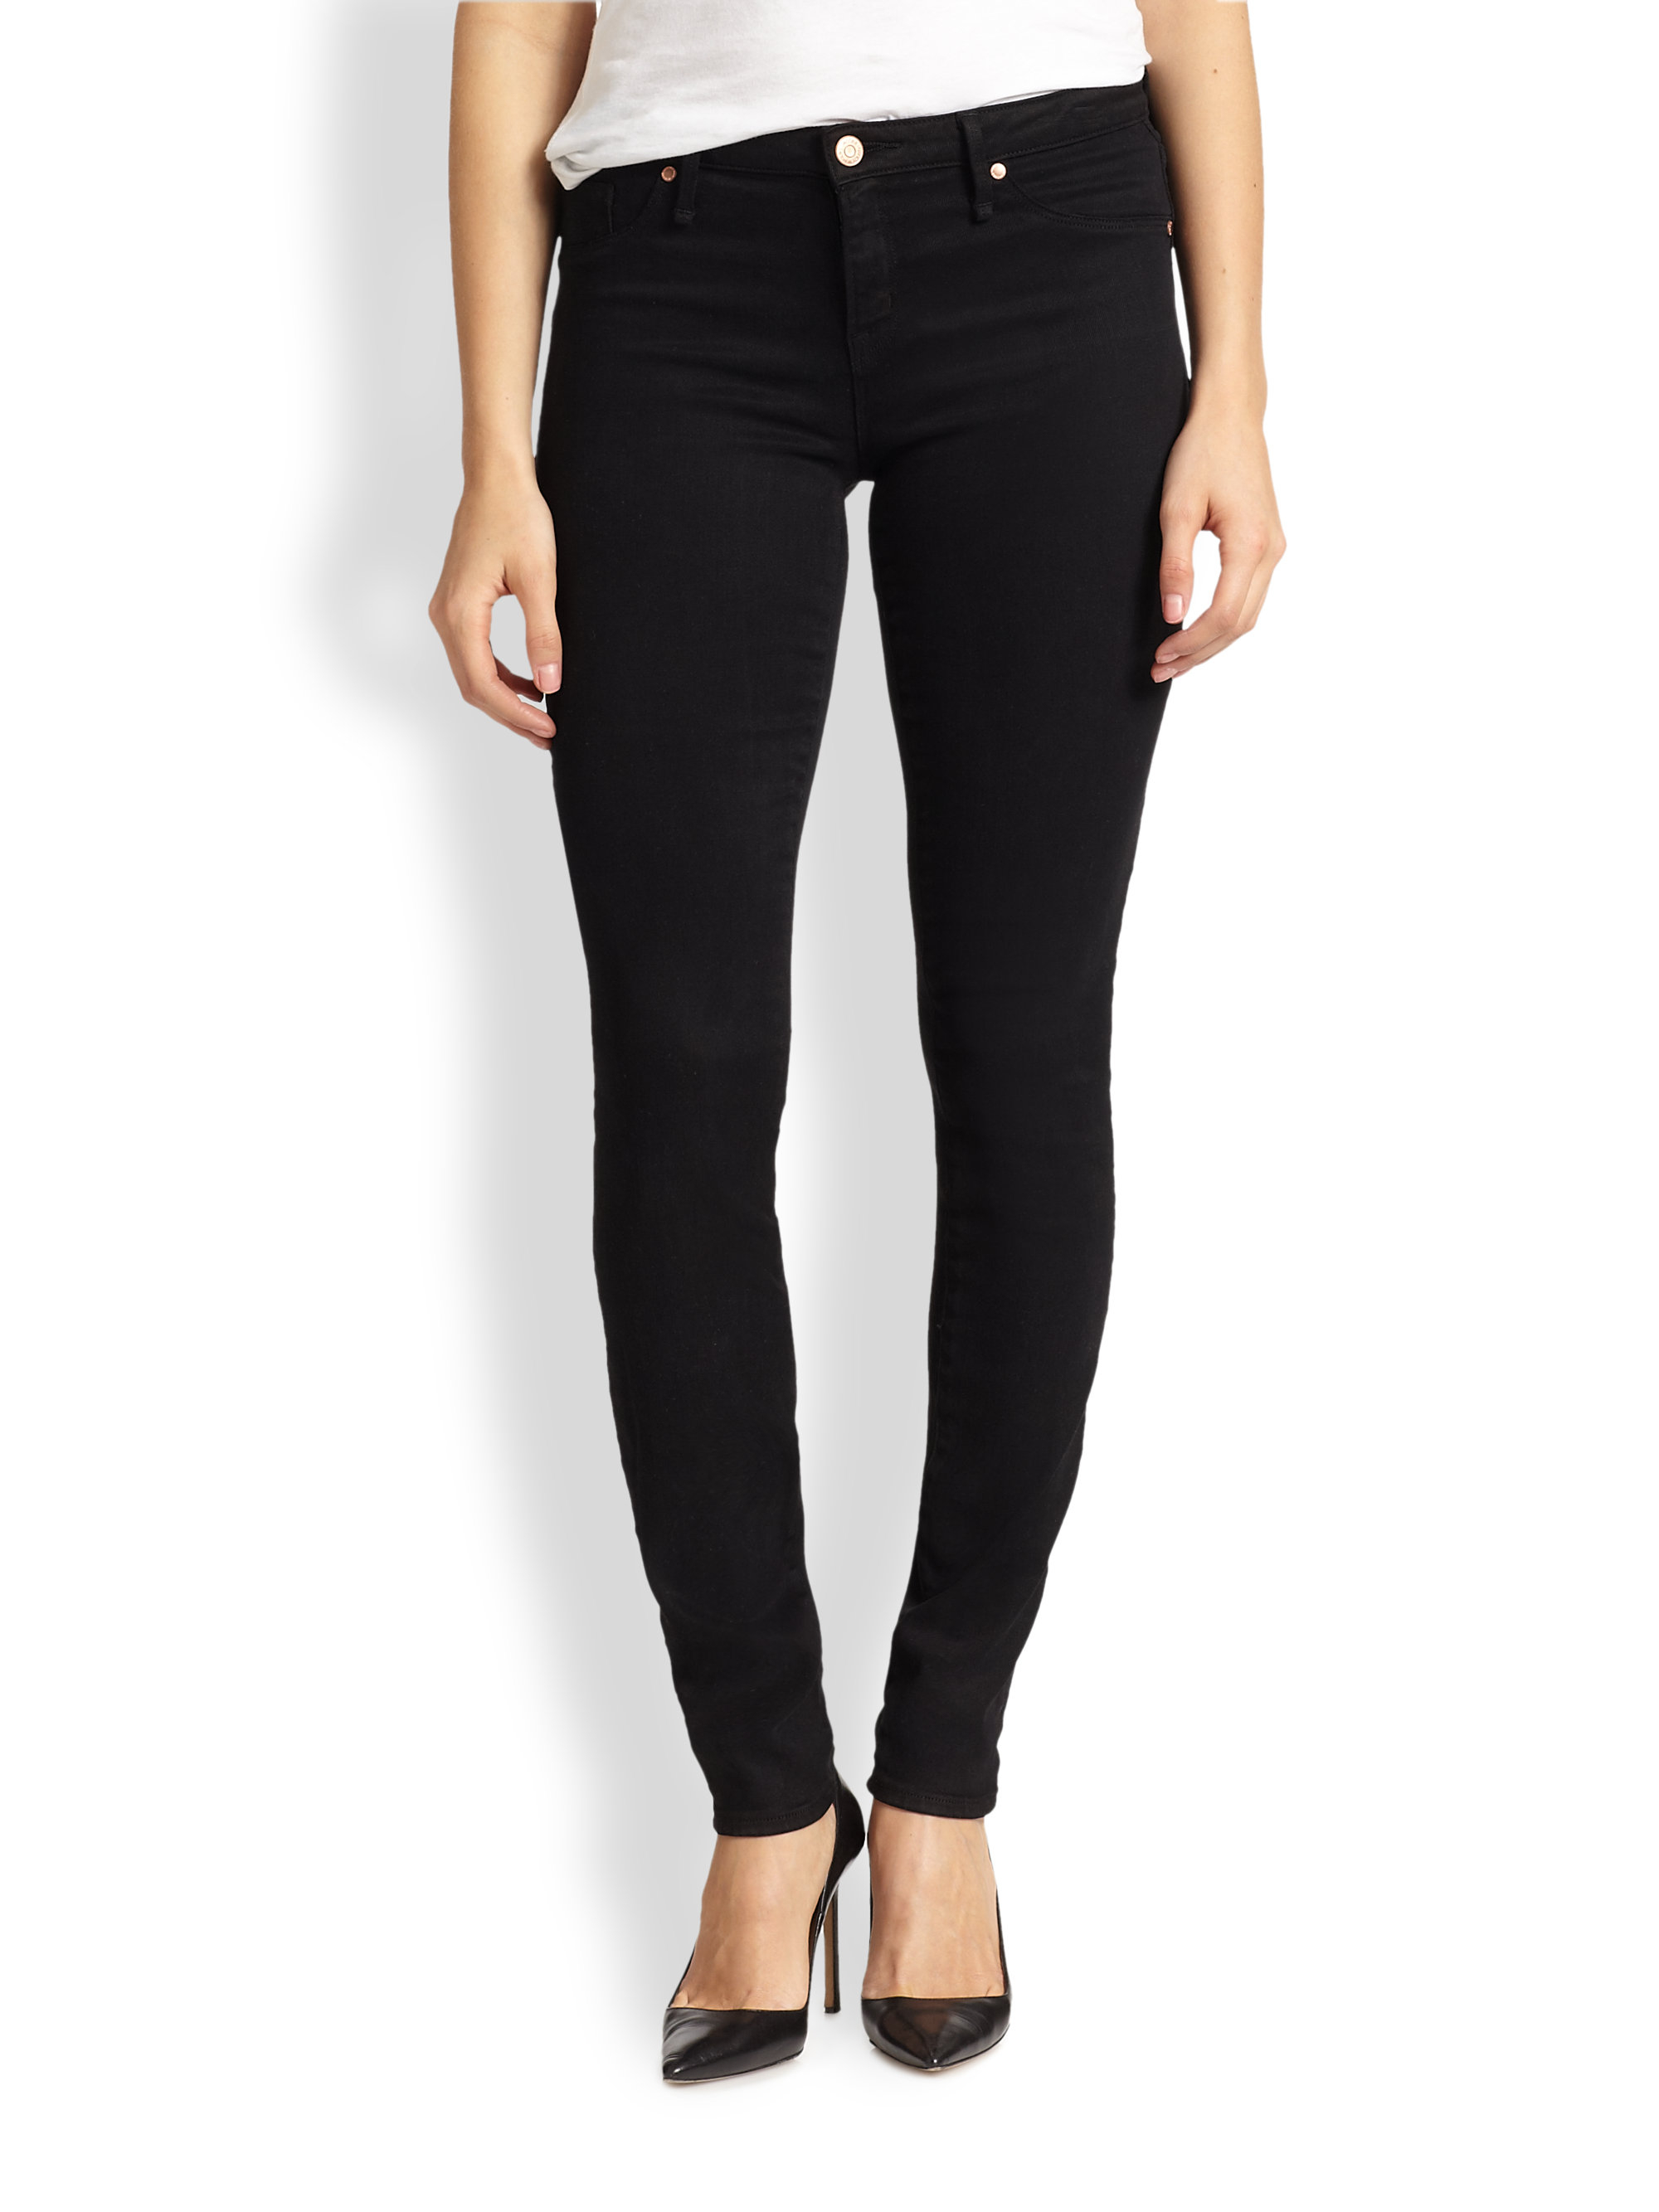 Lyst - Marc By Marc Jacobs Stick Midrise Jeans in Black